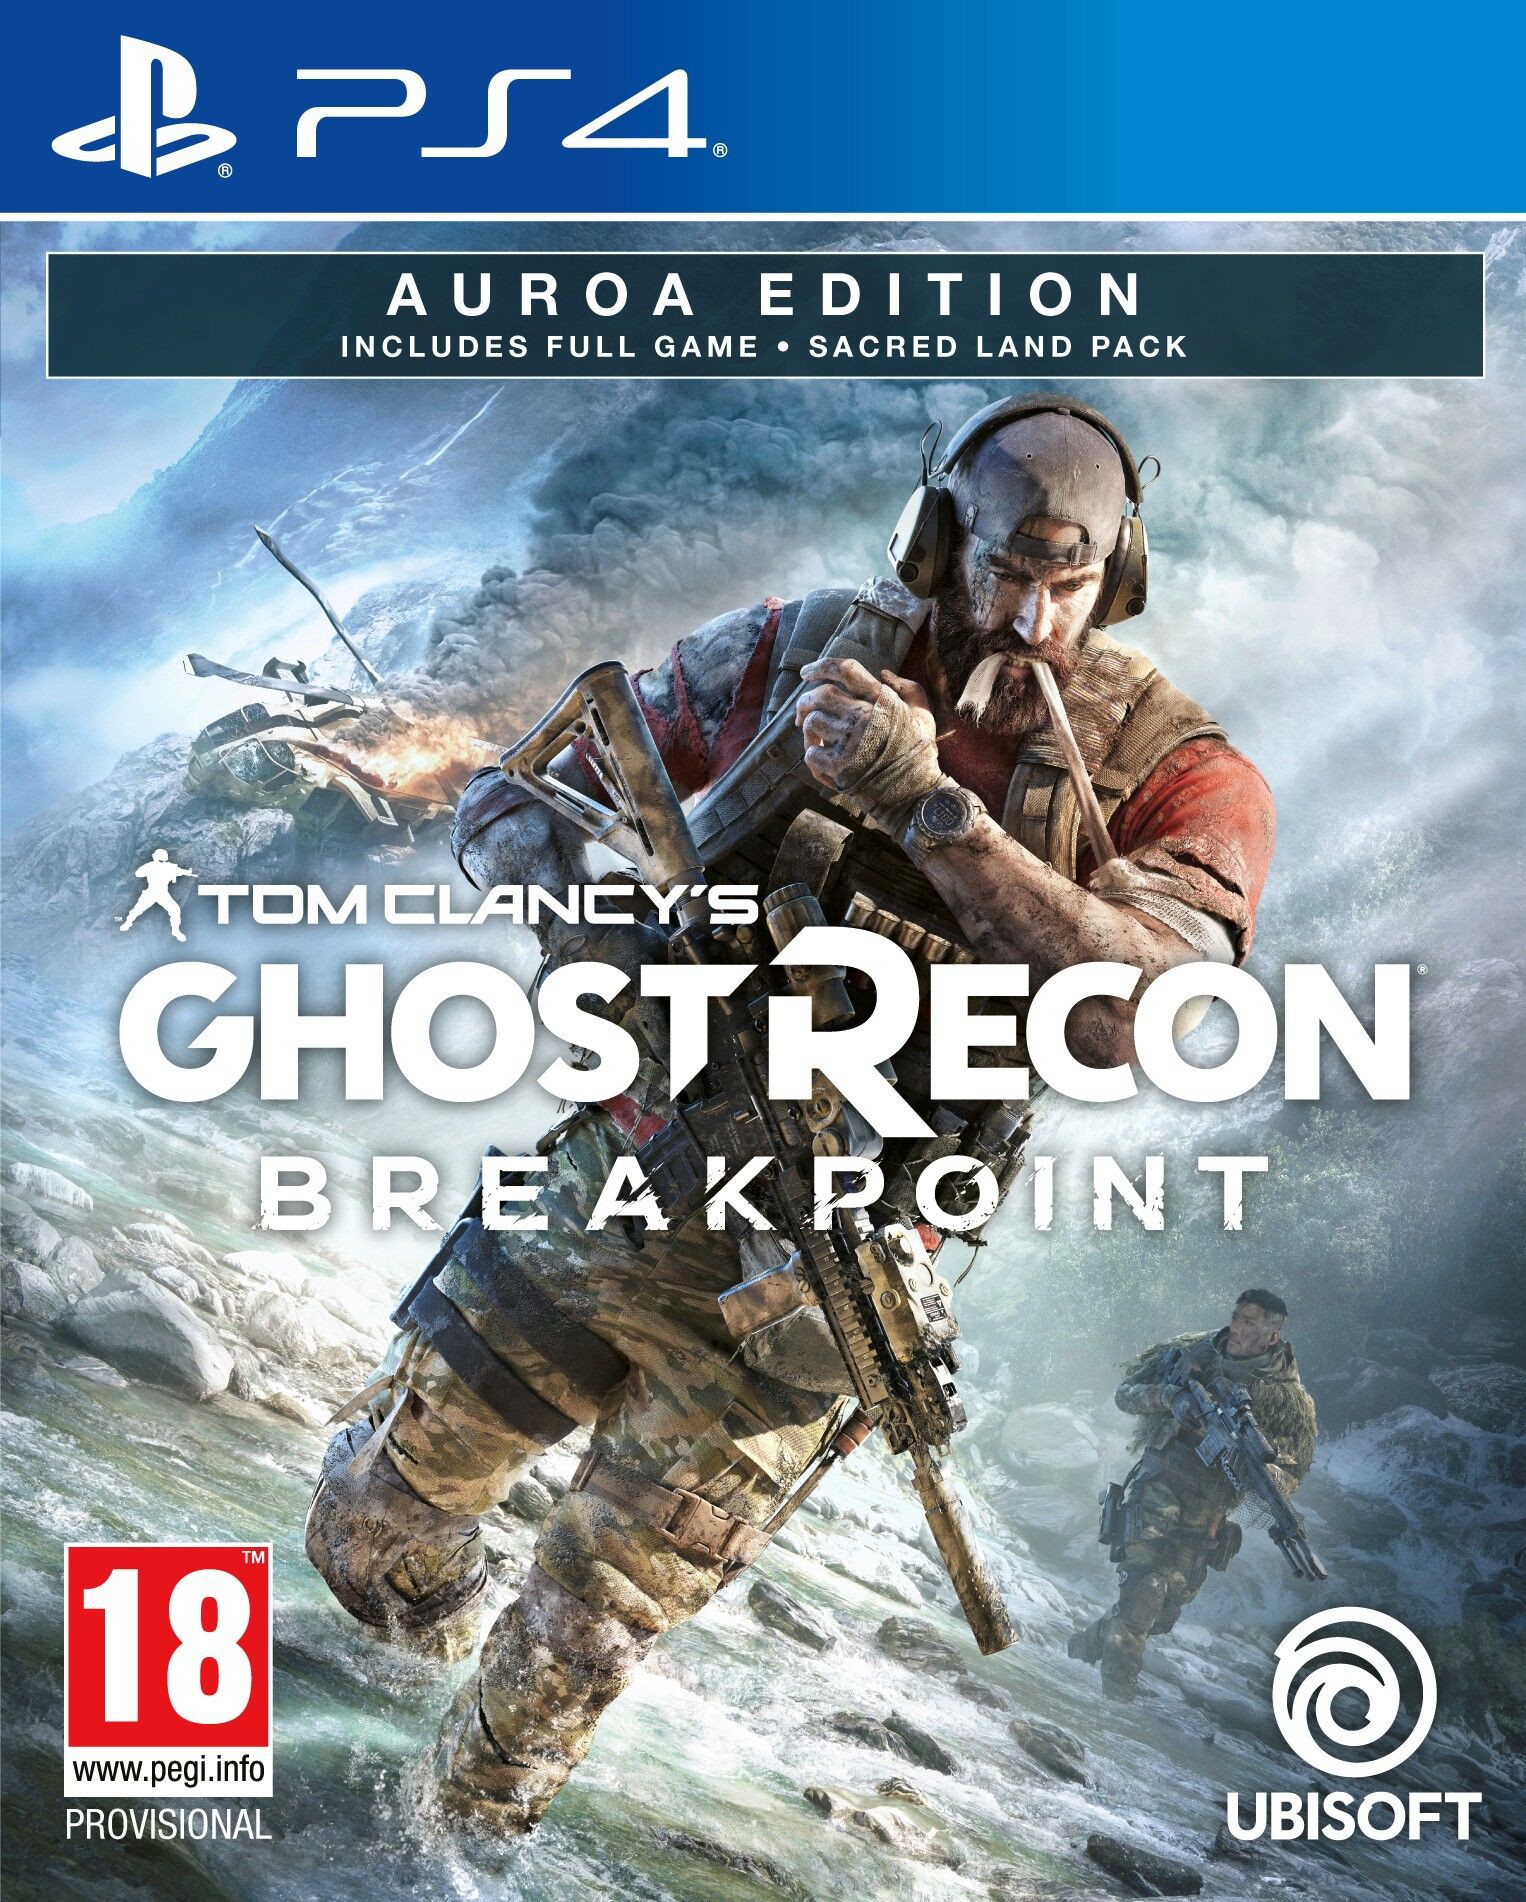 Tom Clancy's Ghost Recon Breakpoint AUROA edition